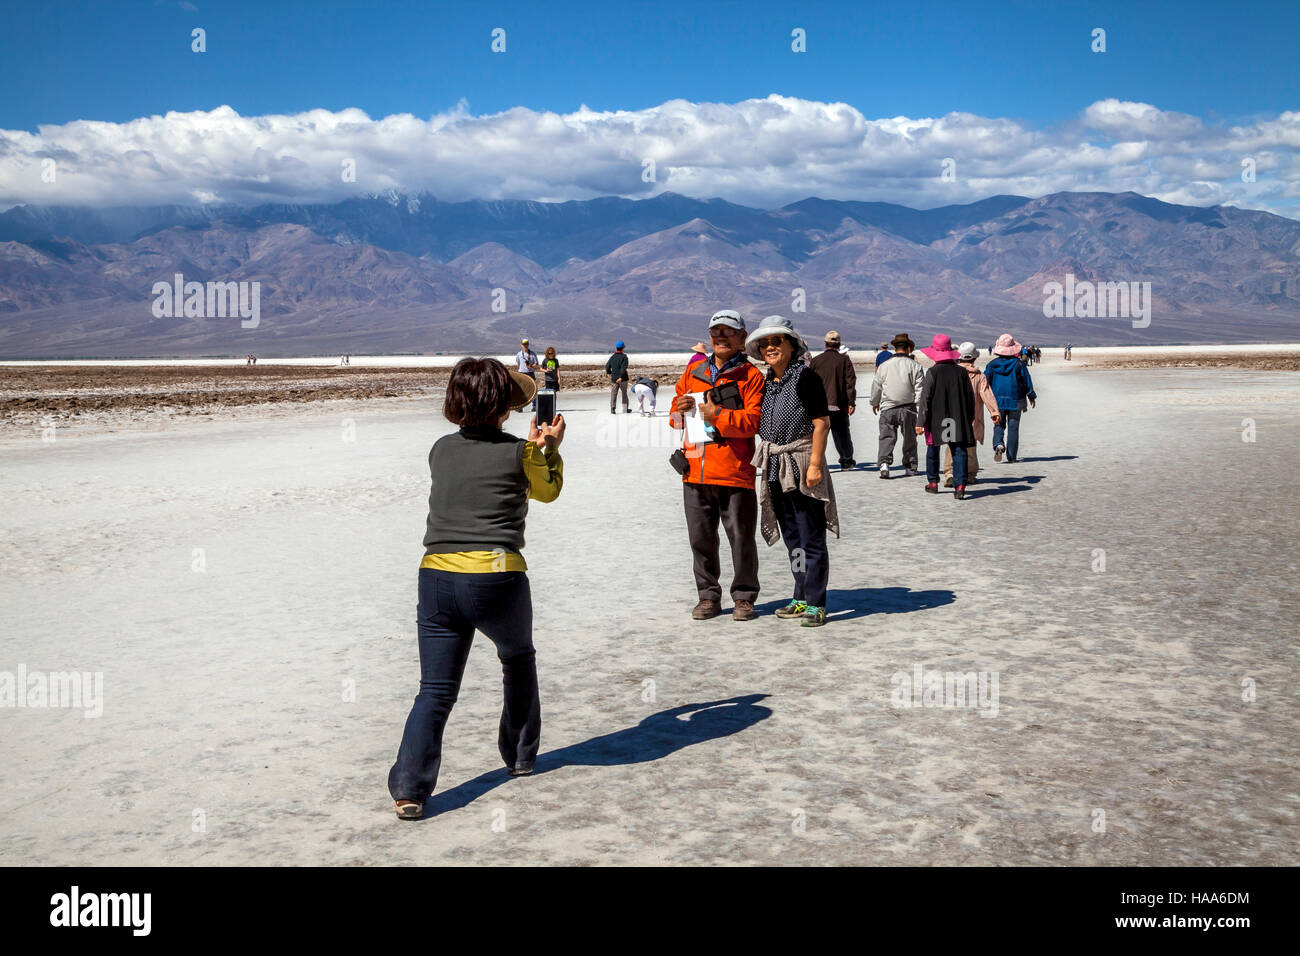 Asian woman taking pictures of her friends, Badwater Basin, Death Valley National Park, California, USA Stock Photo